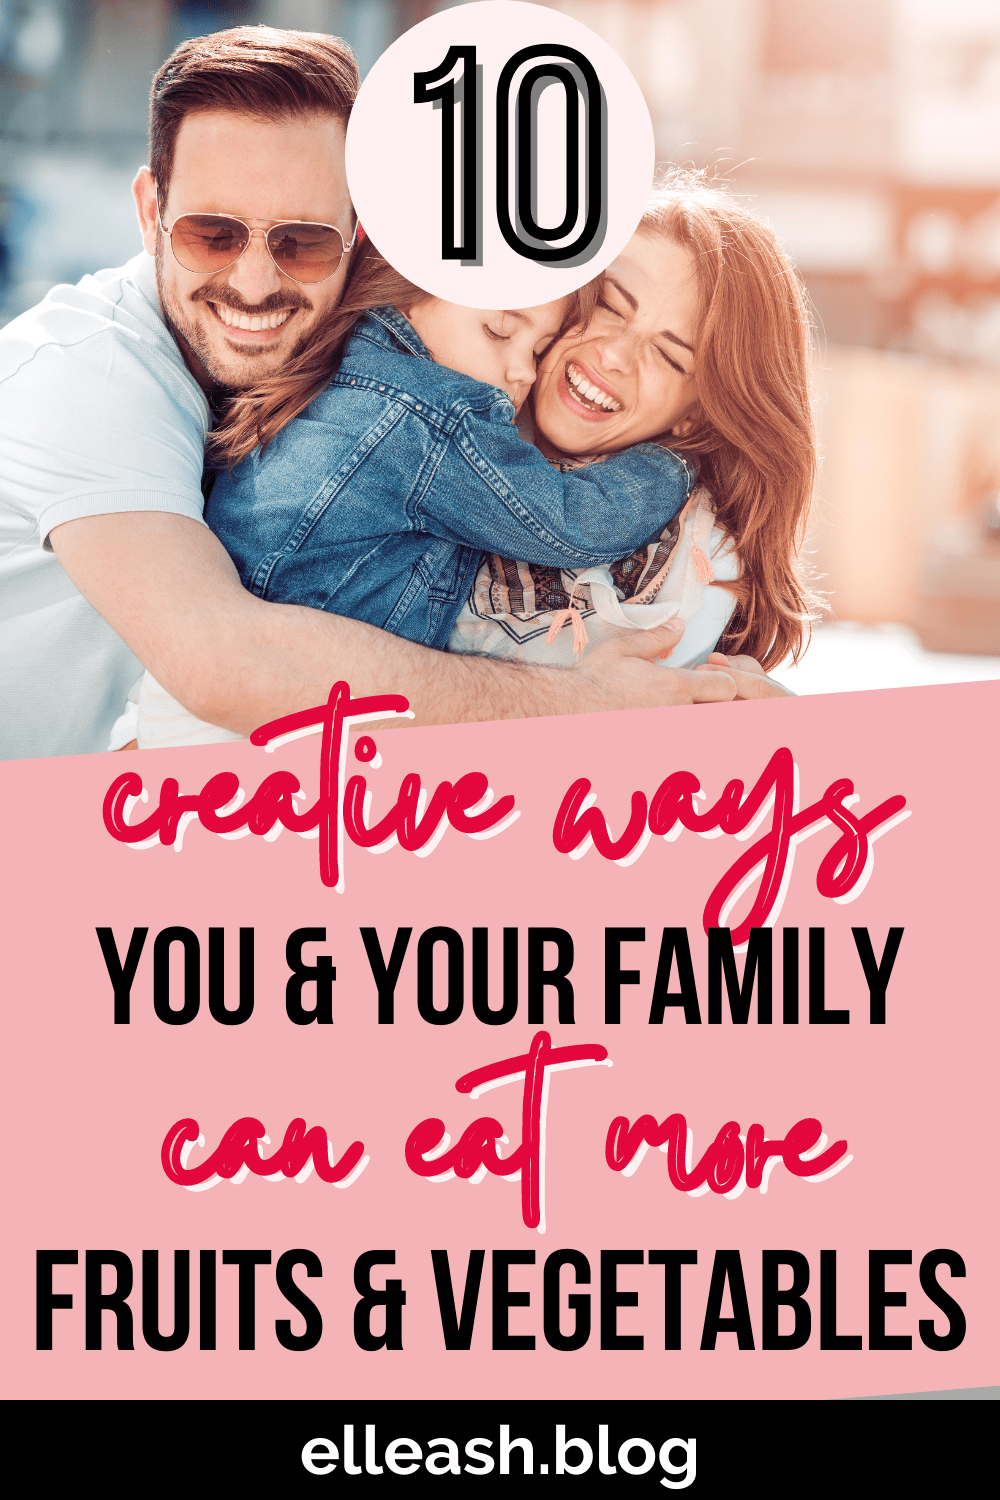 10 CREATIVE WAYS YOU & YOUR FAMILY CAN EAT MORE FRUITS & VEGETABLES